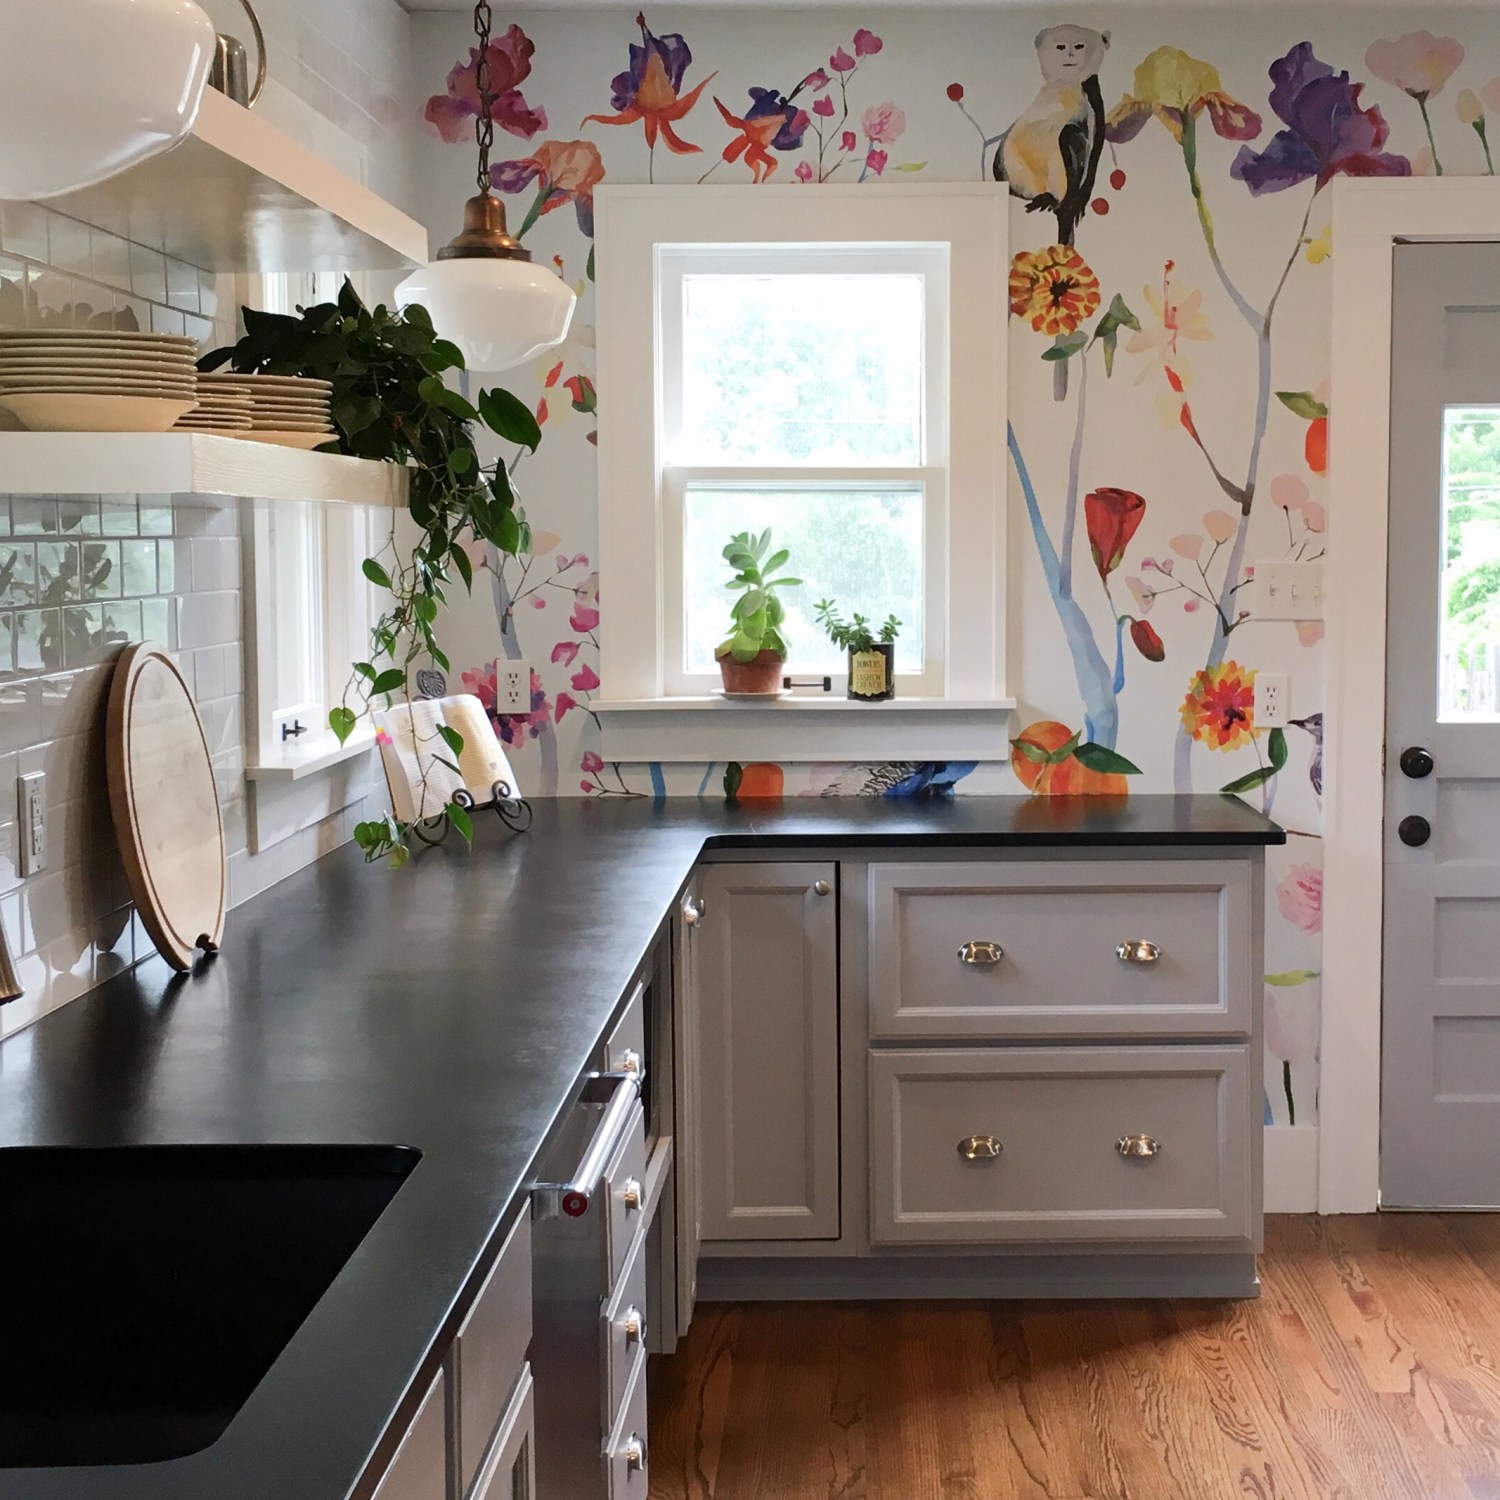 Gray kitchen counters against colorful floral wallpaper